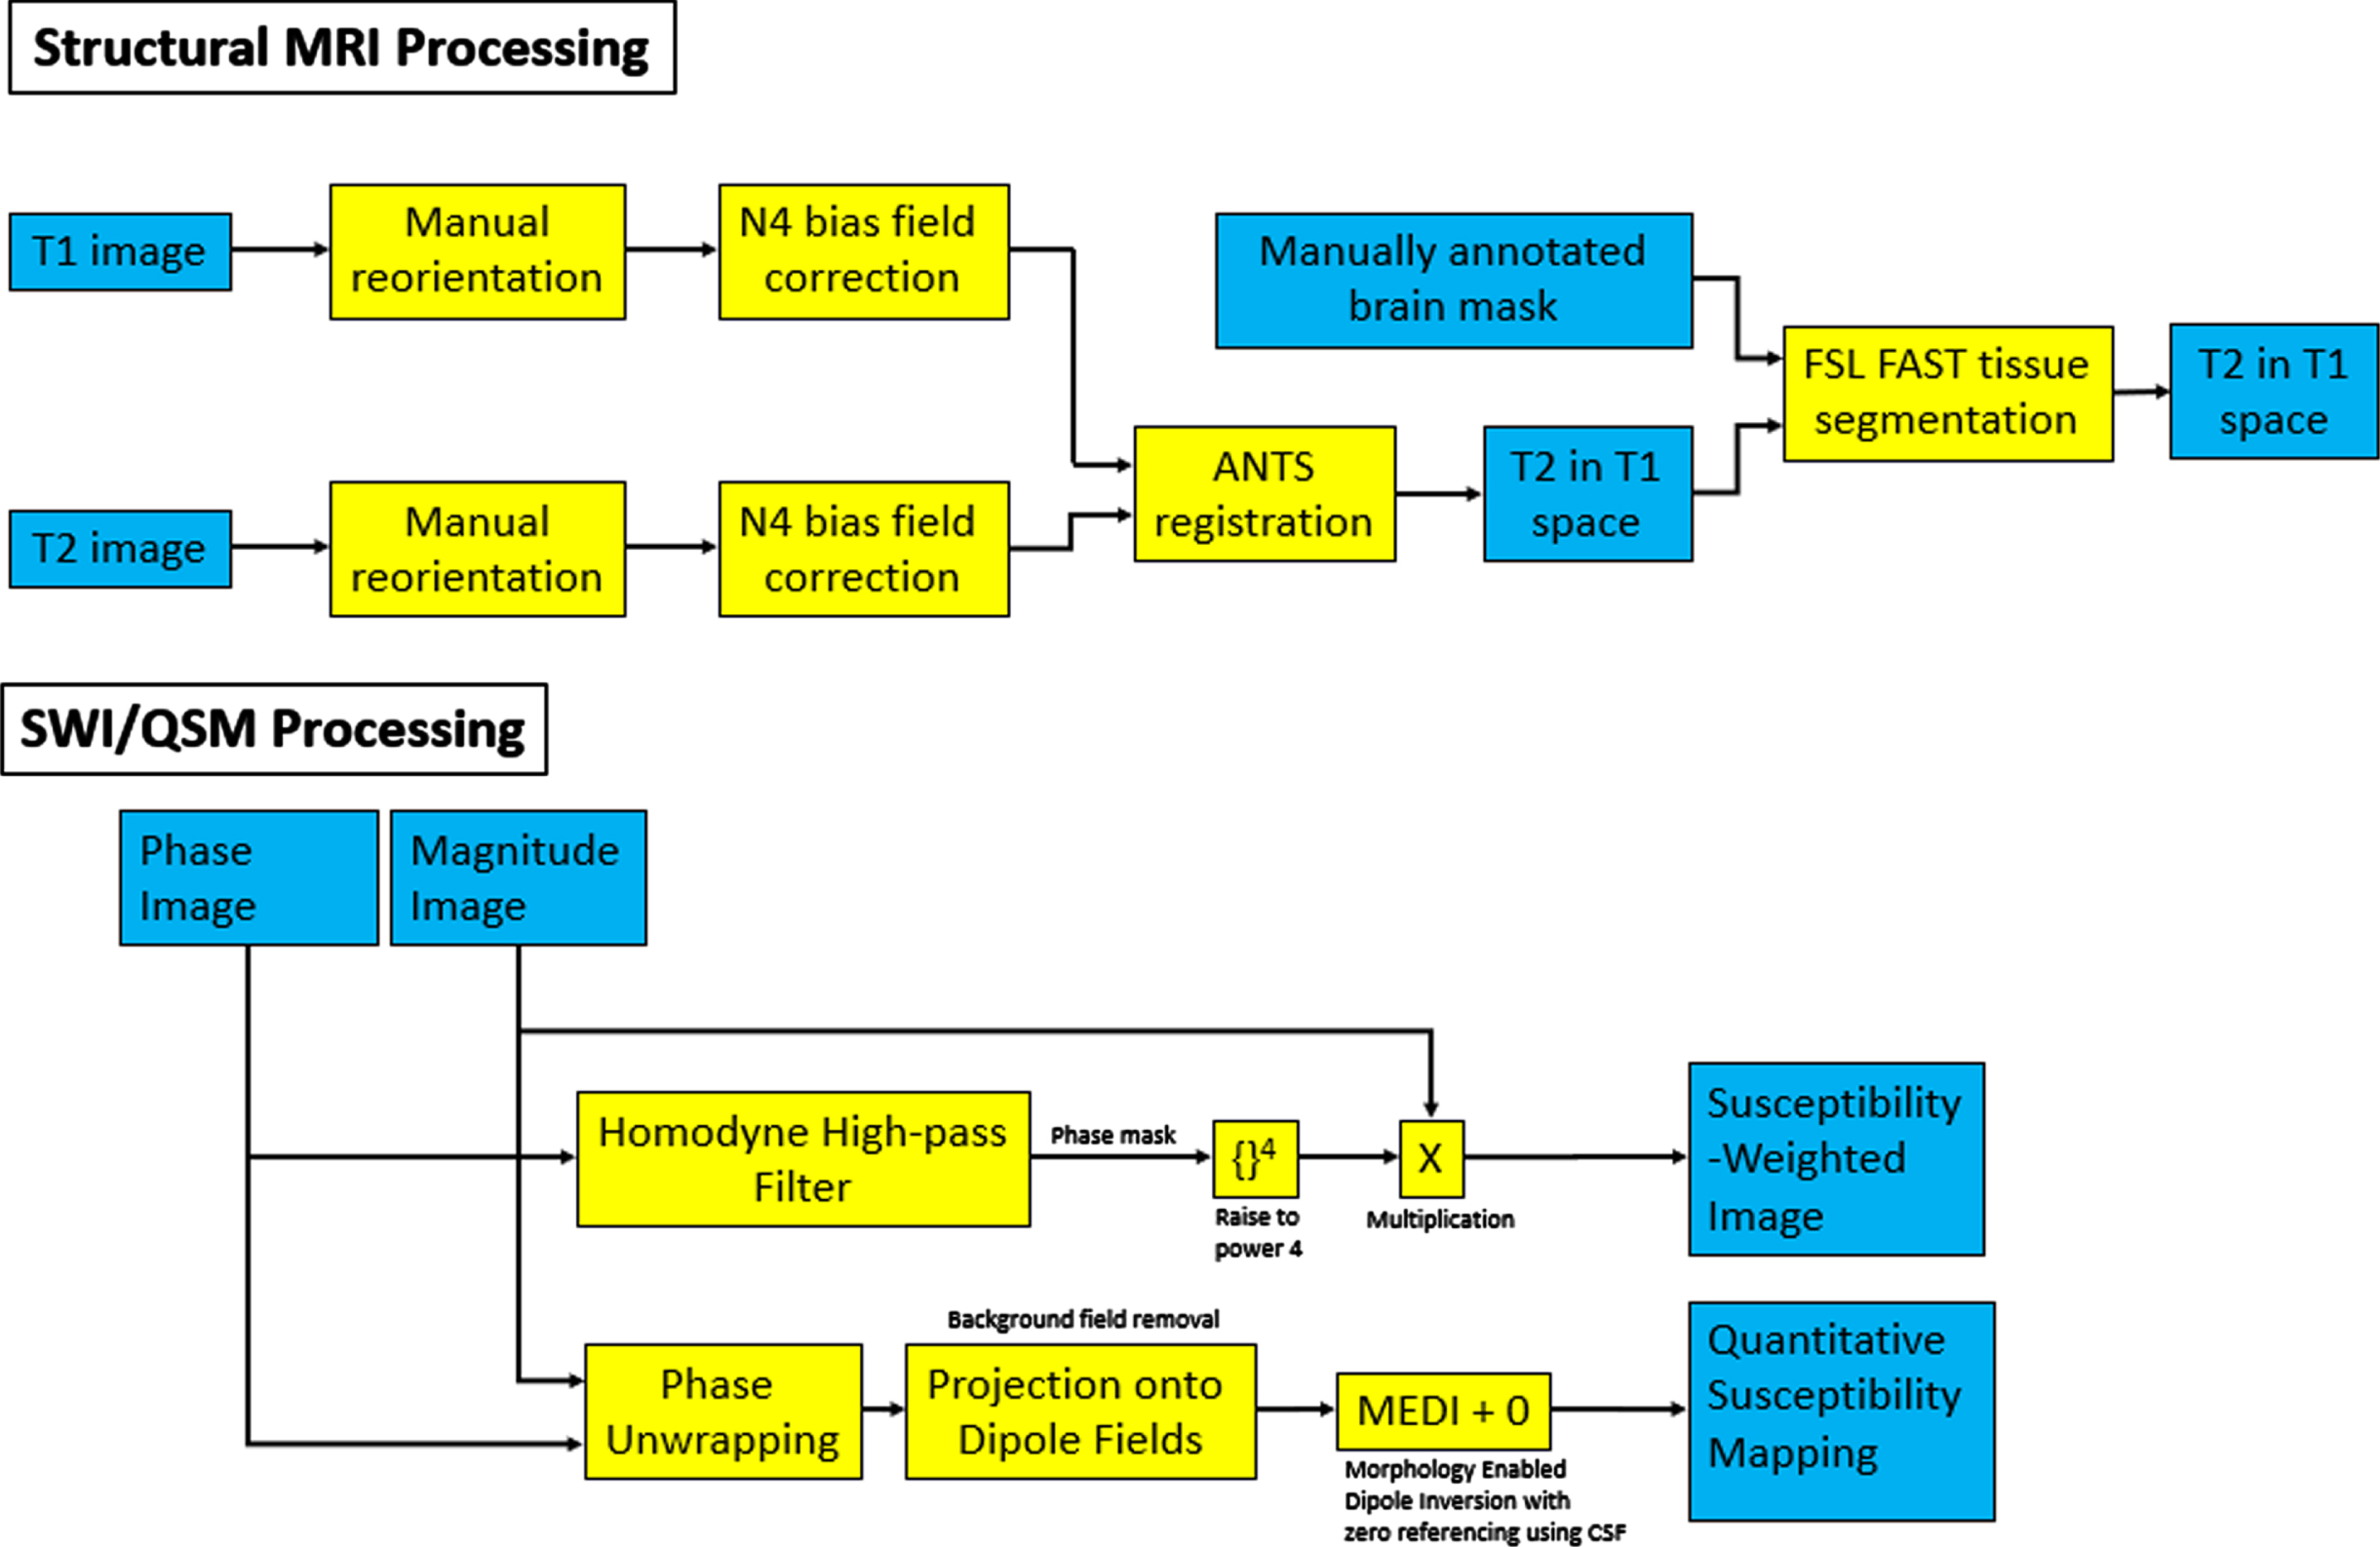 Flowchart of the various filters applied for the processing of structural and SWI/QSM images. Blue boxes correspond to image inputs/outputs, while yellow corresponds to applied filters and transformations.